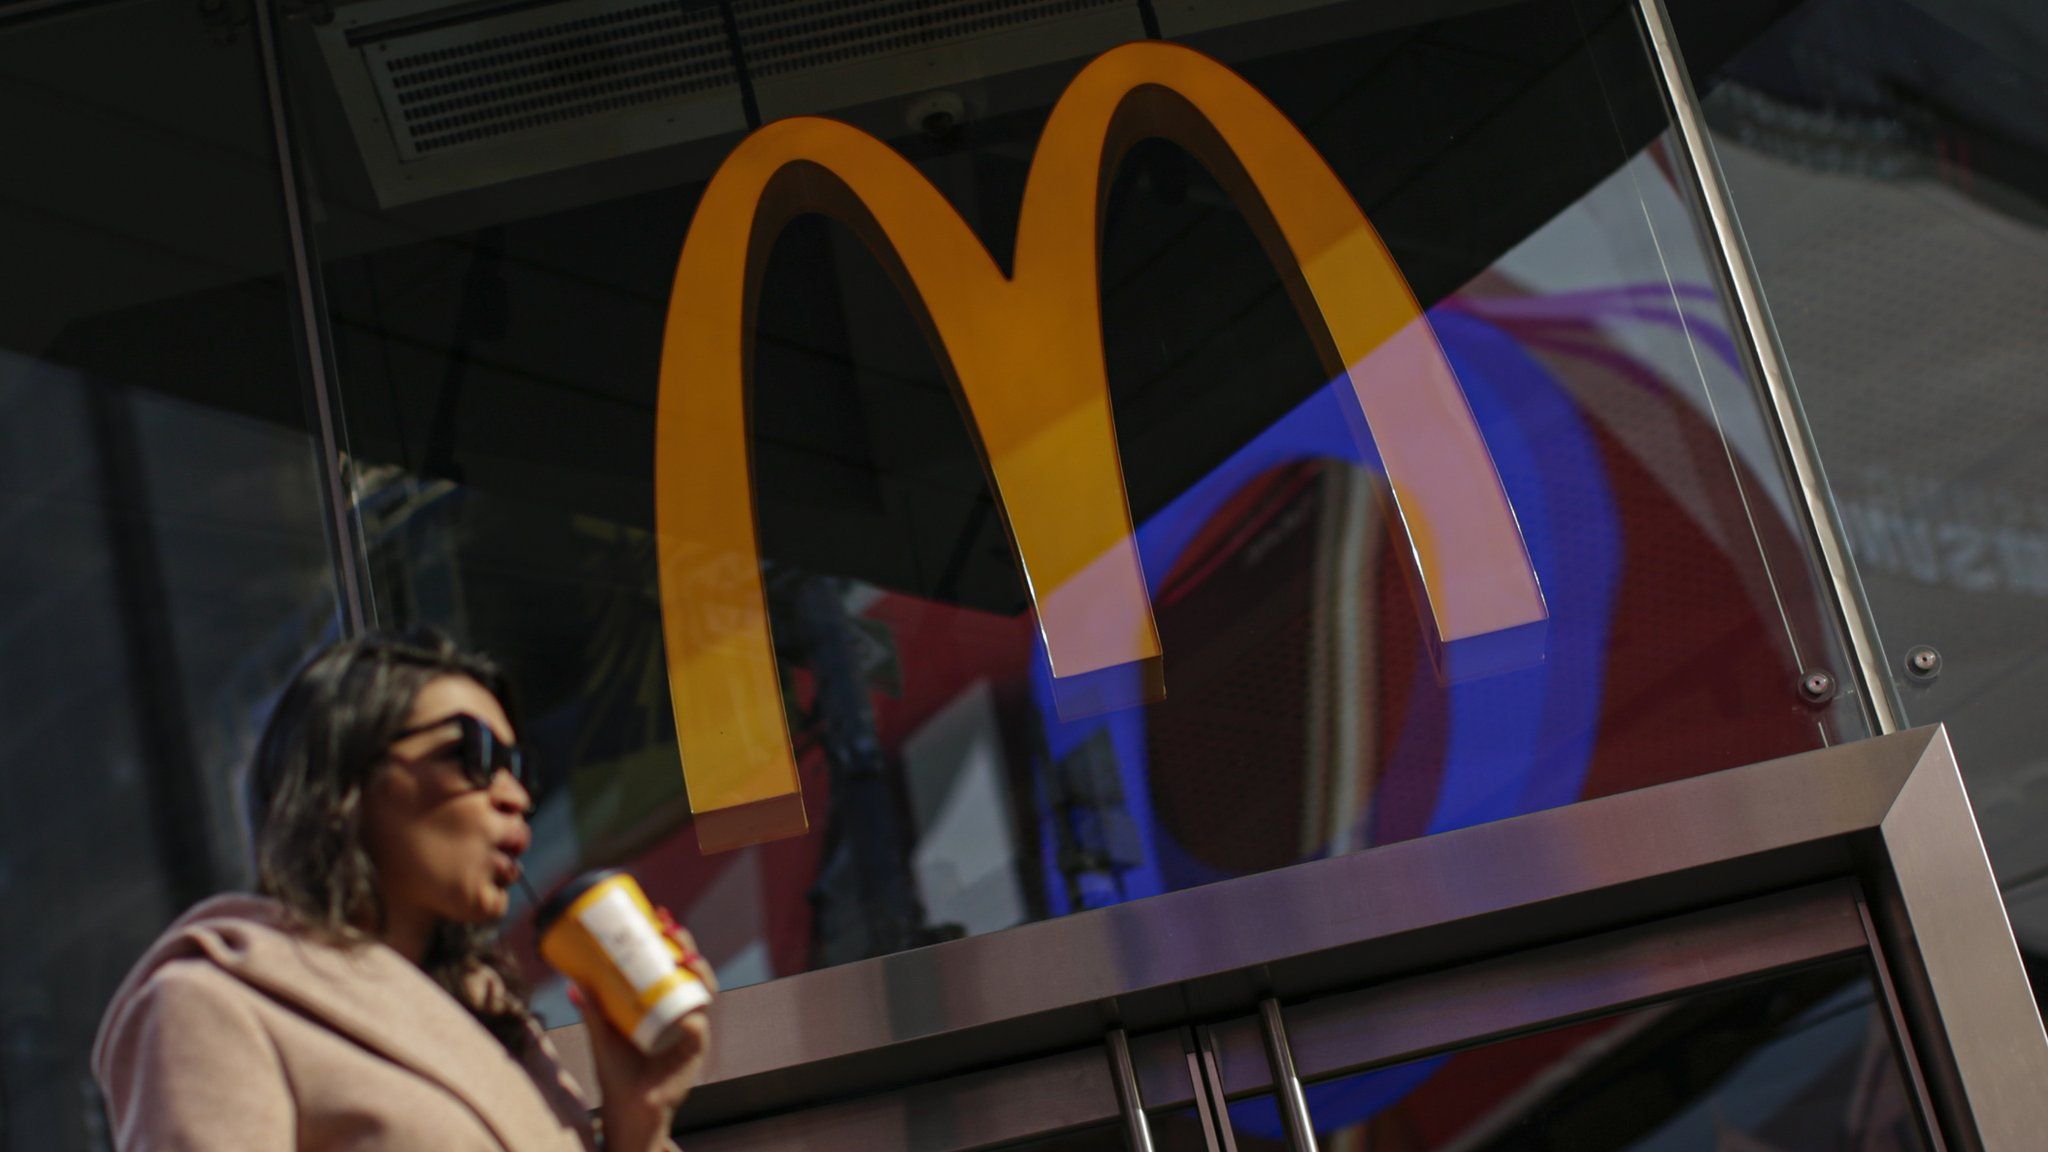 A woman walk pass McDonald's restaurant in Times Square following the firing of their CEO, Steve Easterbrook on November 4, 2019 in New York City